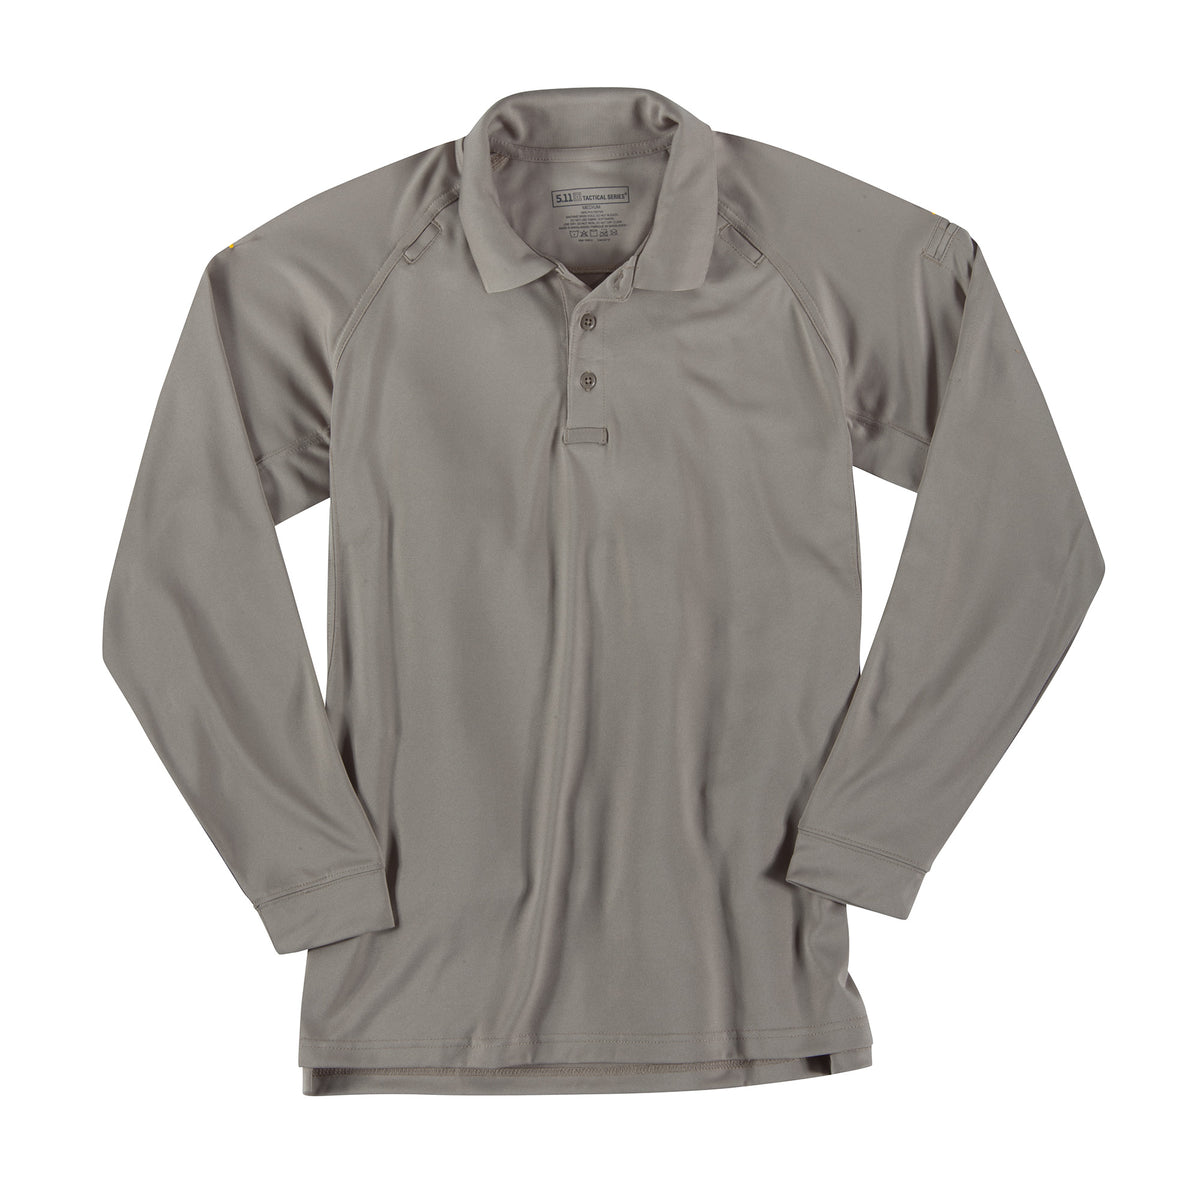 5.11 Tactical Performance Long Sleeve Silver Tan